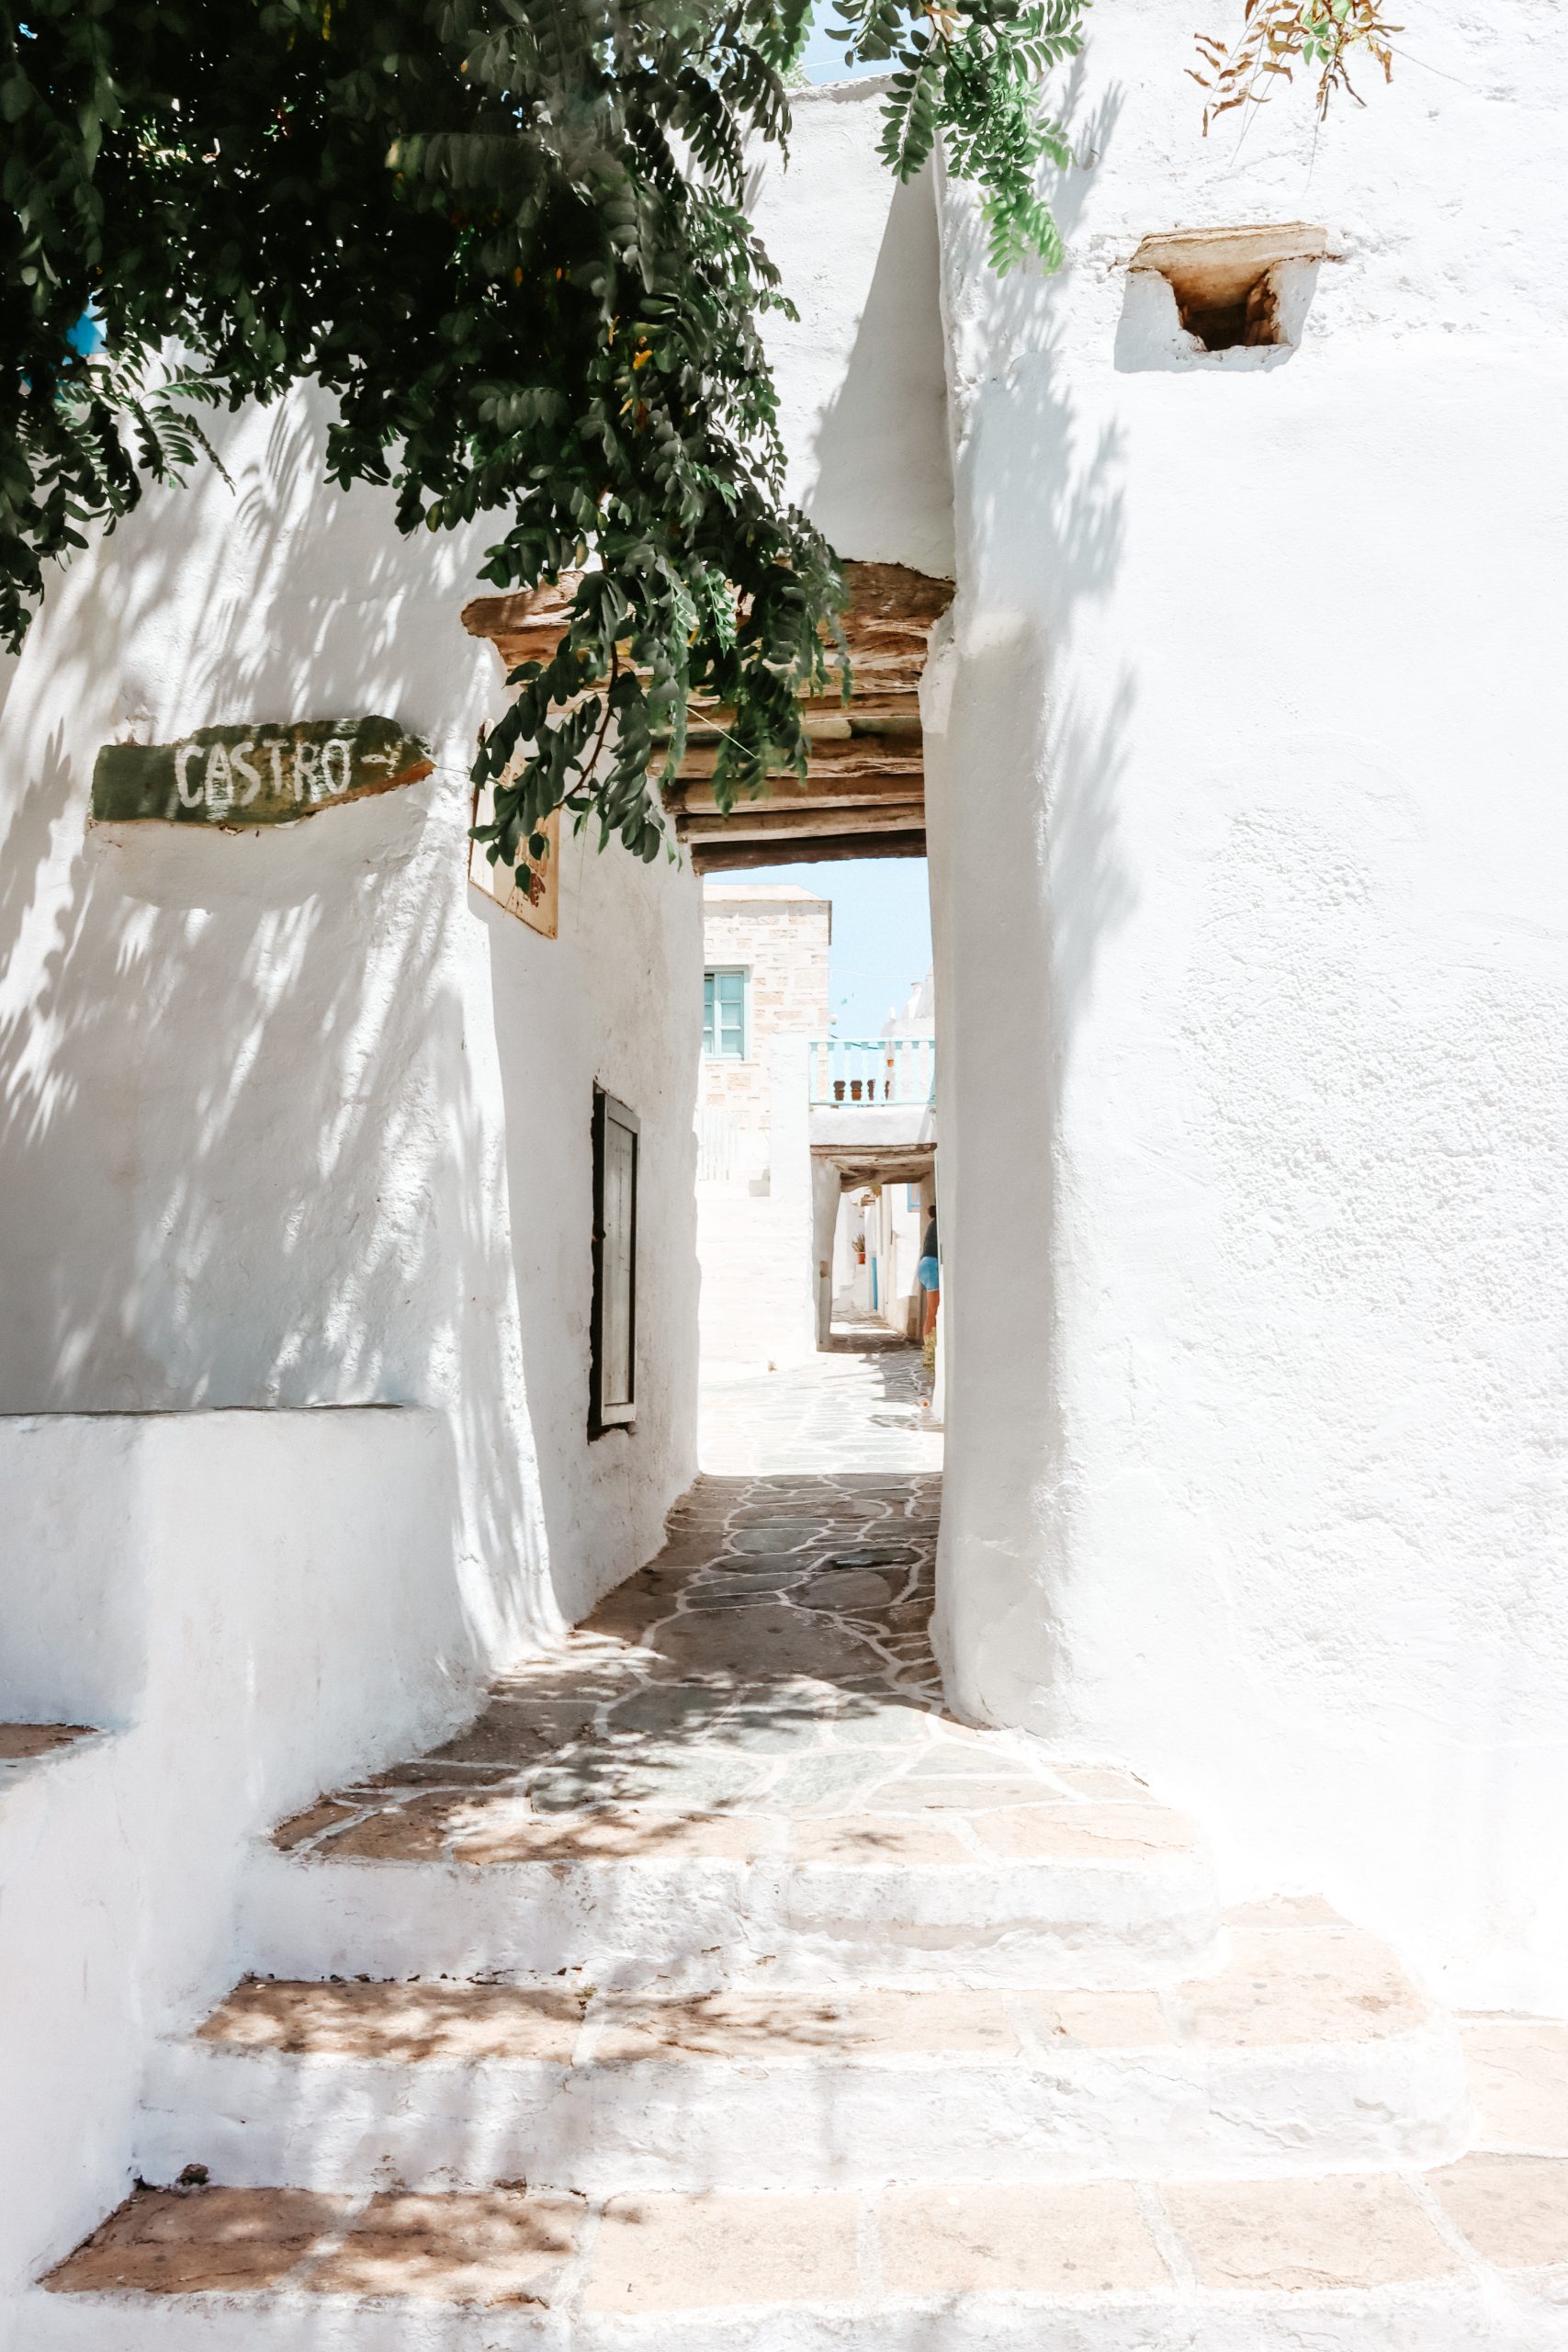 The entrance to Folegandros Castro with whitewashed walls